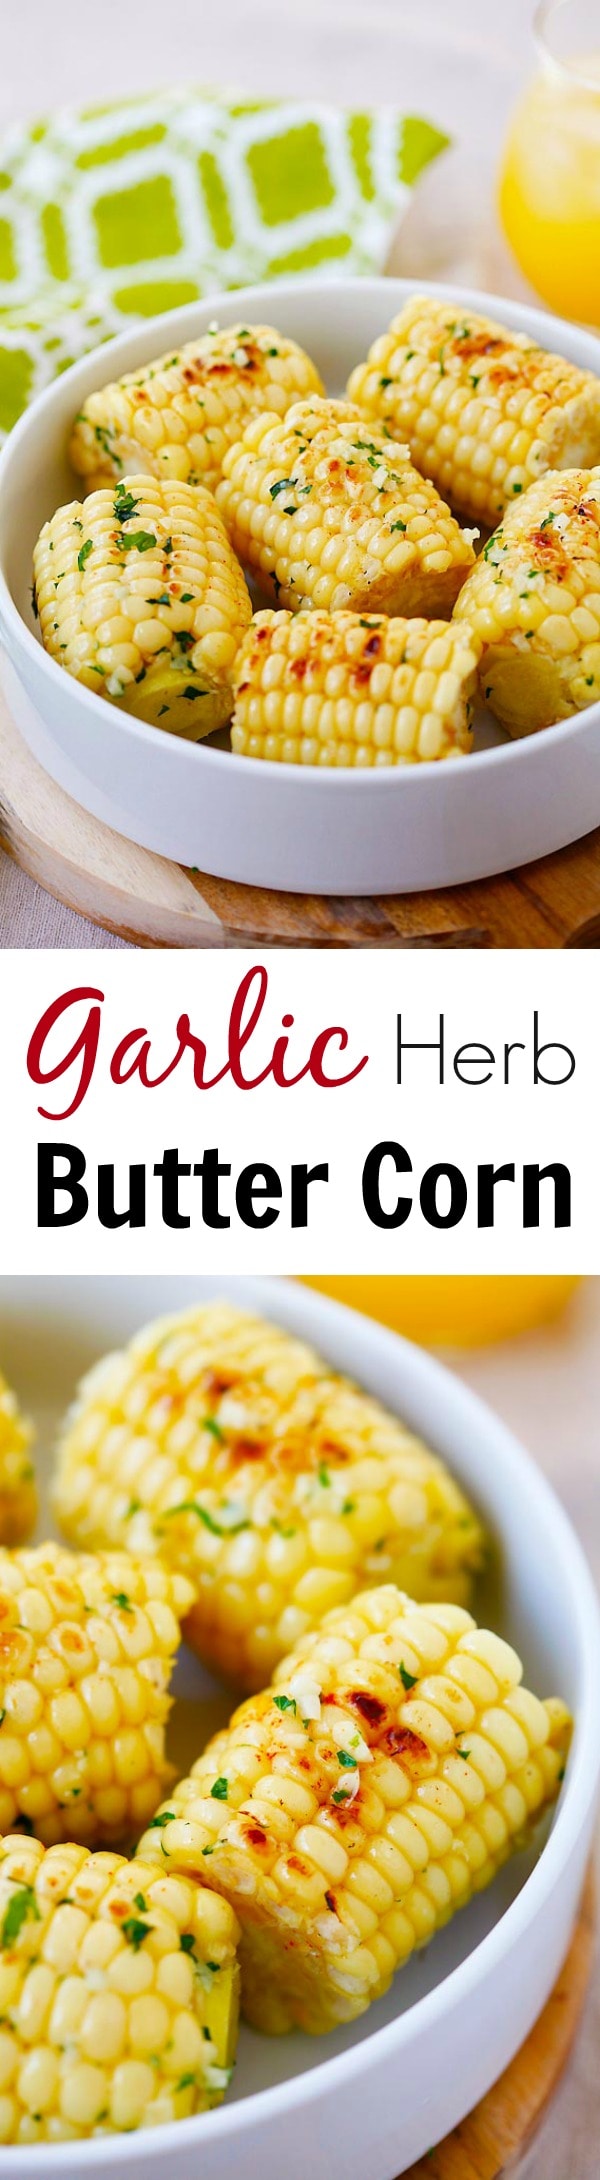 Garlic-Herb Butter Roasted Corn - corn with garlic herb butter and roasted on grill pan. The corn takes 15 mins to make and SO good!! | rasamalaysia.com